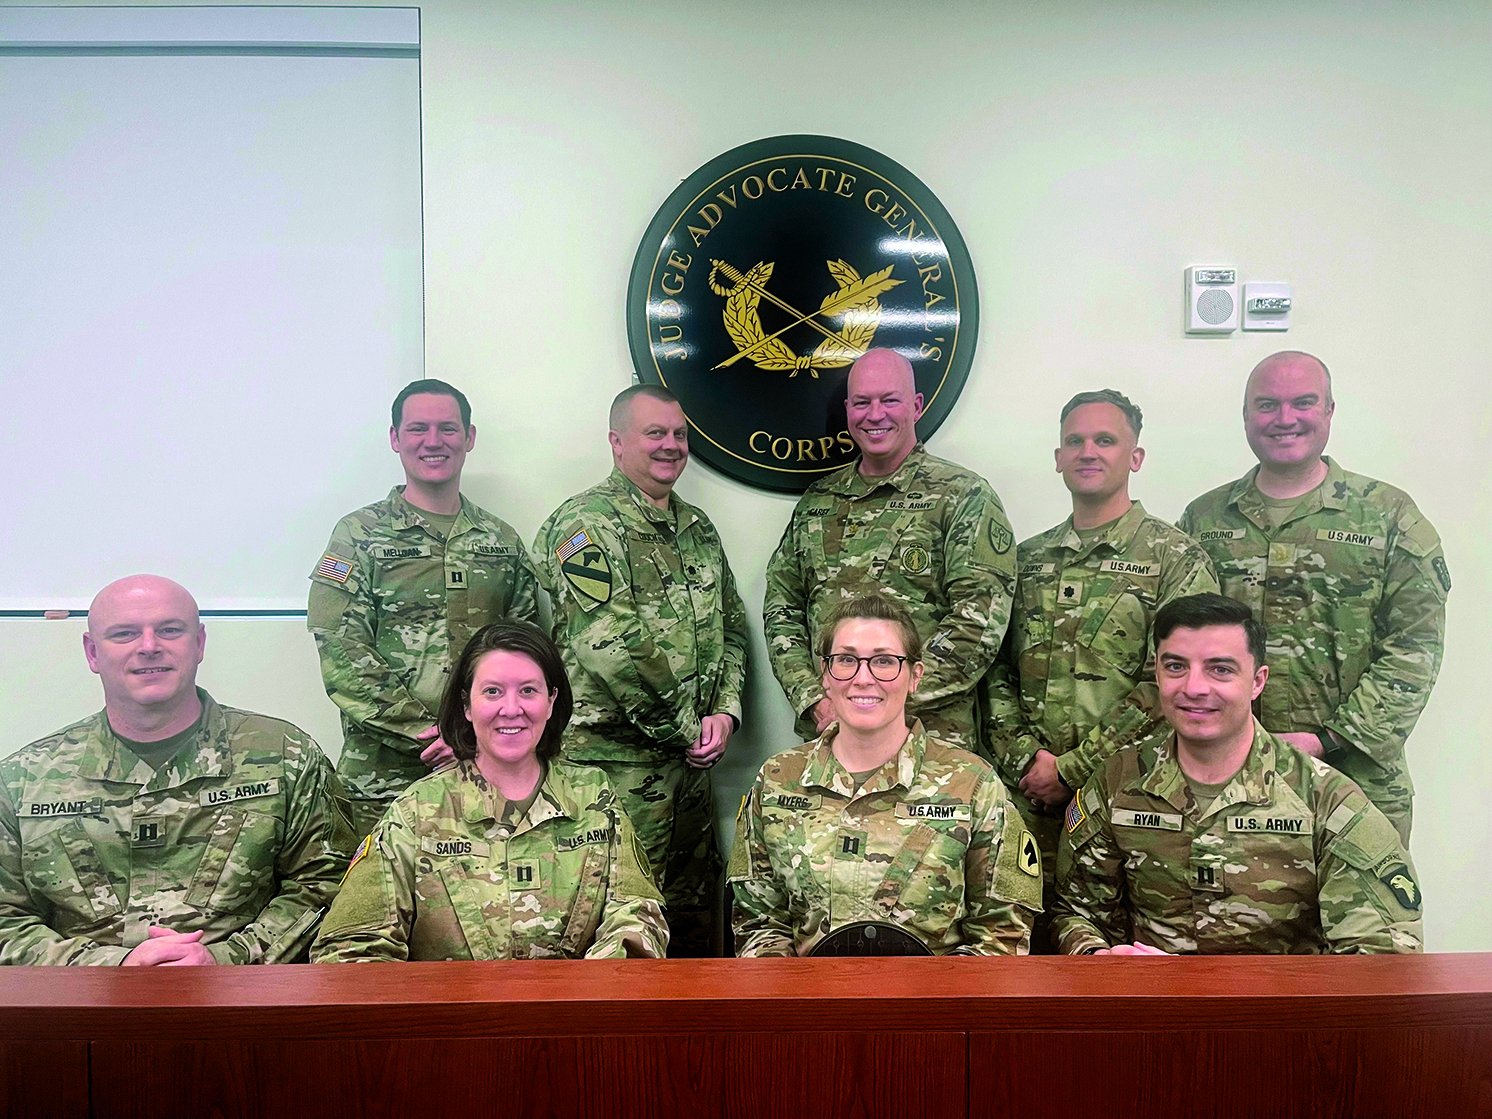 Eight Kentucky Army National Guard JAs
            completed the Basic Trial Advocacy Course
            at Fort Belvoir, Virginia. The course,
            hosted by the Trial Counsel Assistance Pro
            -
            gram (TCAP), marked the National Guard’s
            first training session at TCAP. (Credit: 1LT
            Kaitlin Baudendistel) 